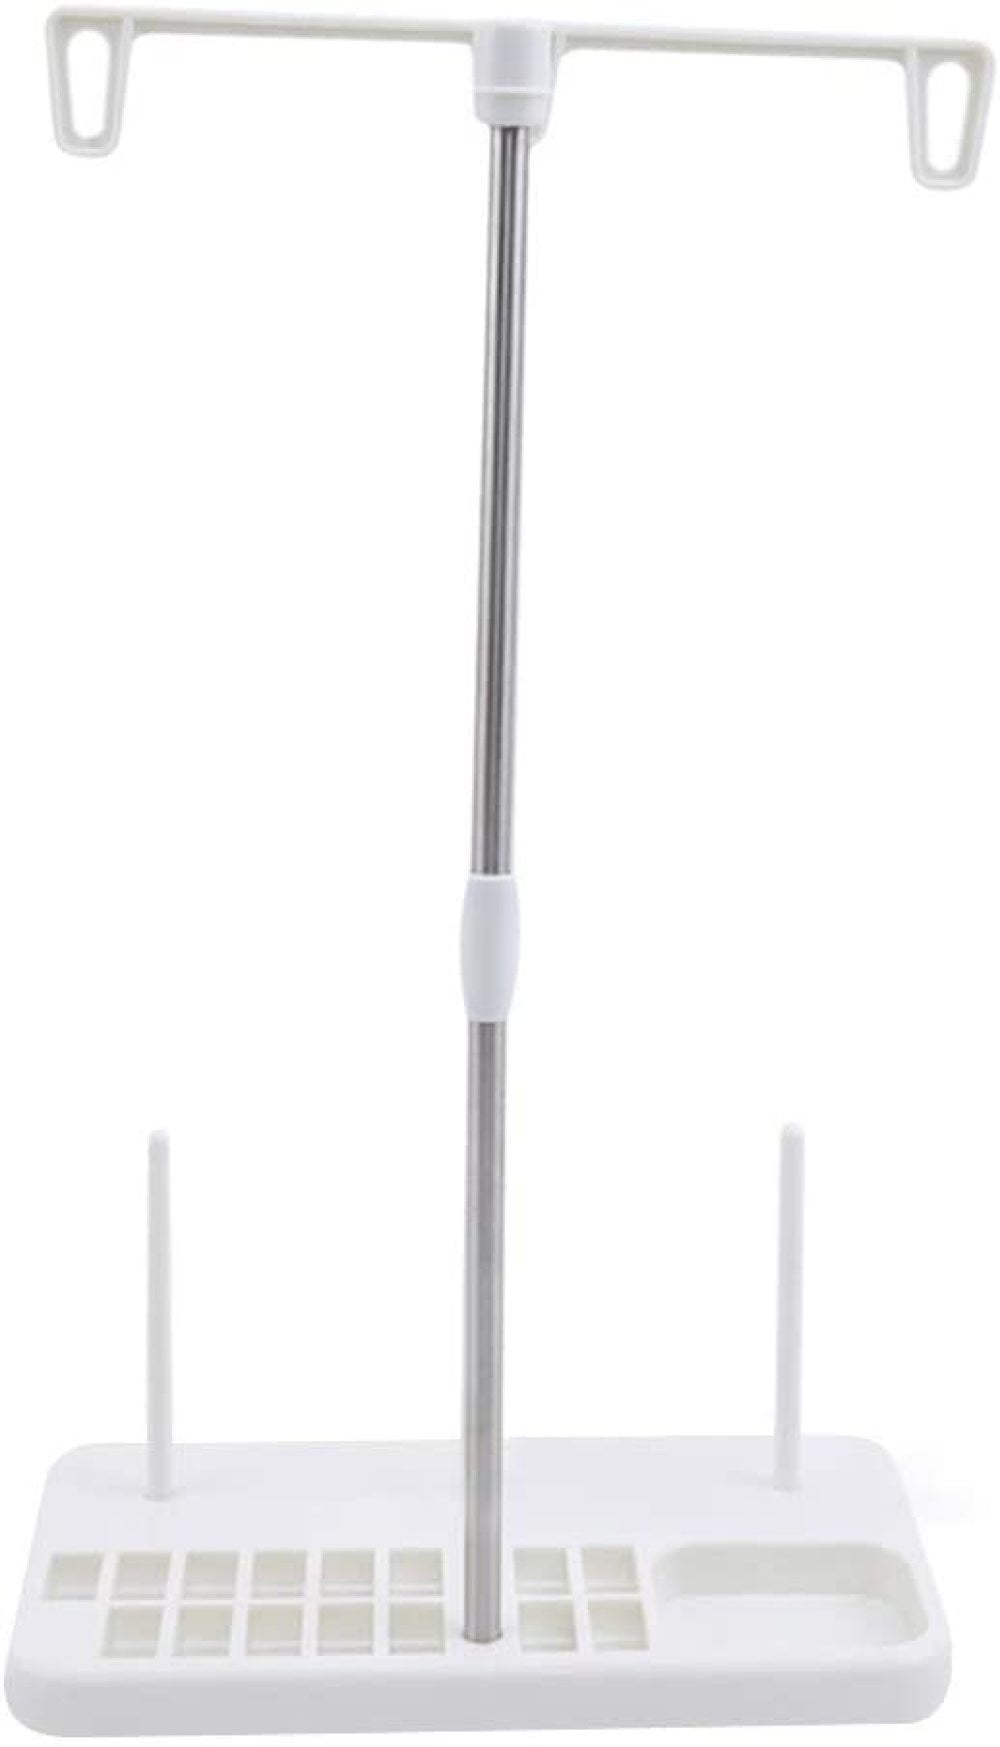 CHDHALTD Household Sewing Tools,Sewing or Quilting Thread Holder,Spool  Holder Stand Threads Rack,Sewing Machine Quilting Sewing Accessories(White)  - Walmart.com